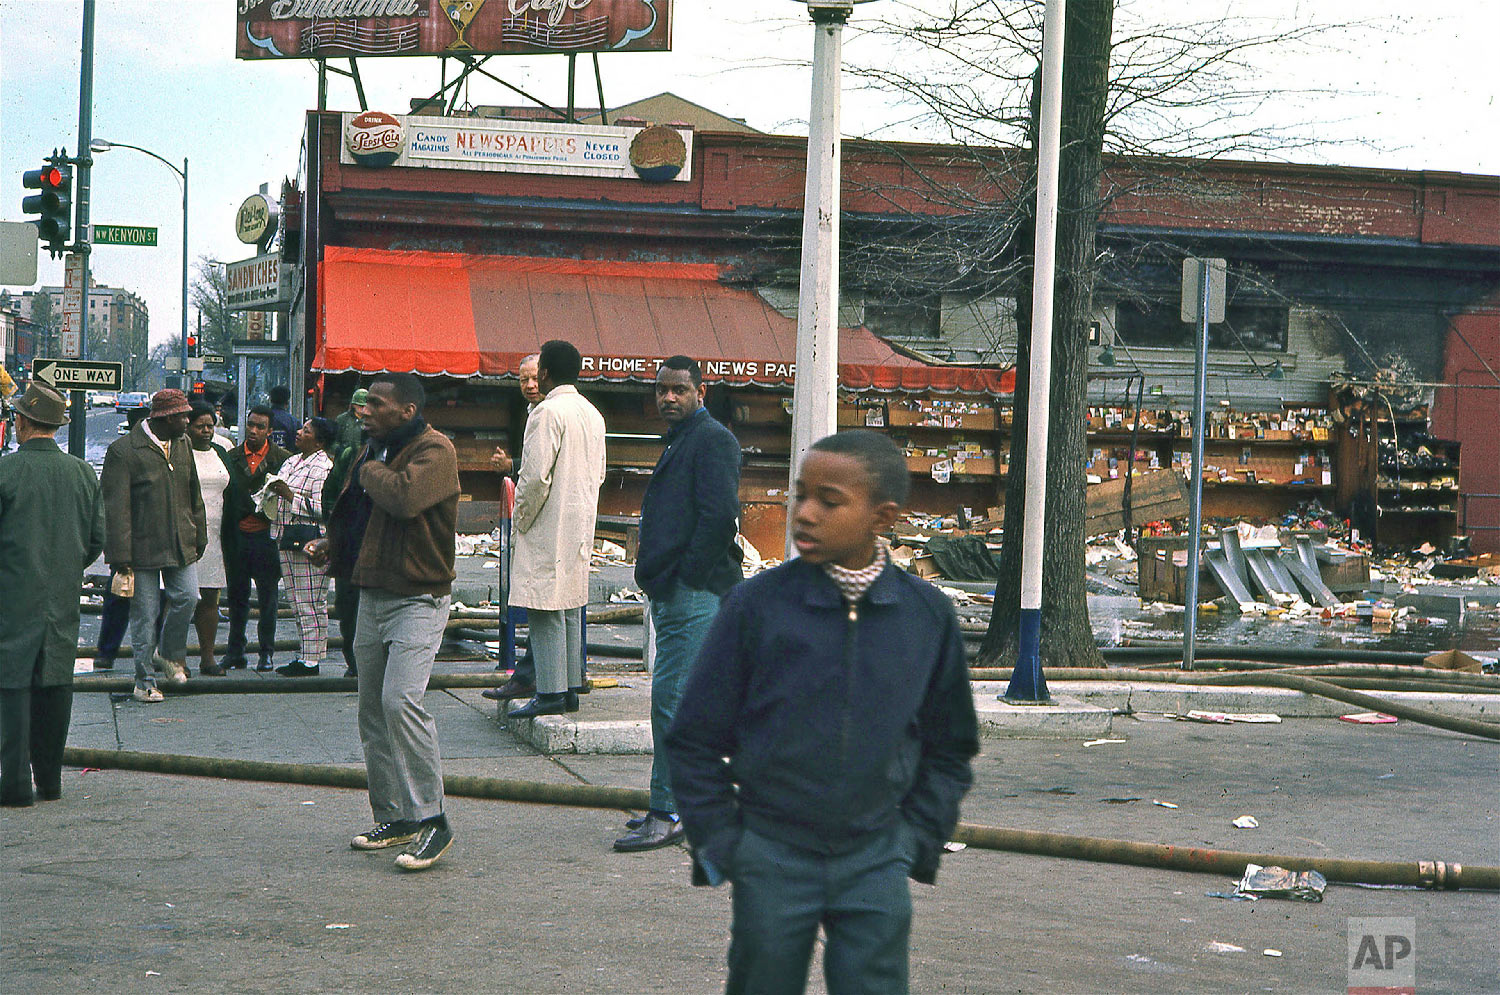  Torn-down newsstand on 14th and Kenyon Streets NW following rioting after the assassination of Dr. Martin Luther King, Jr., Saturday, April 6, 1968. (Photo/Darrell C. Crain/DC Public Library Specials Collections) 

 